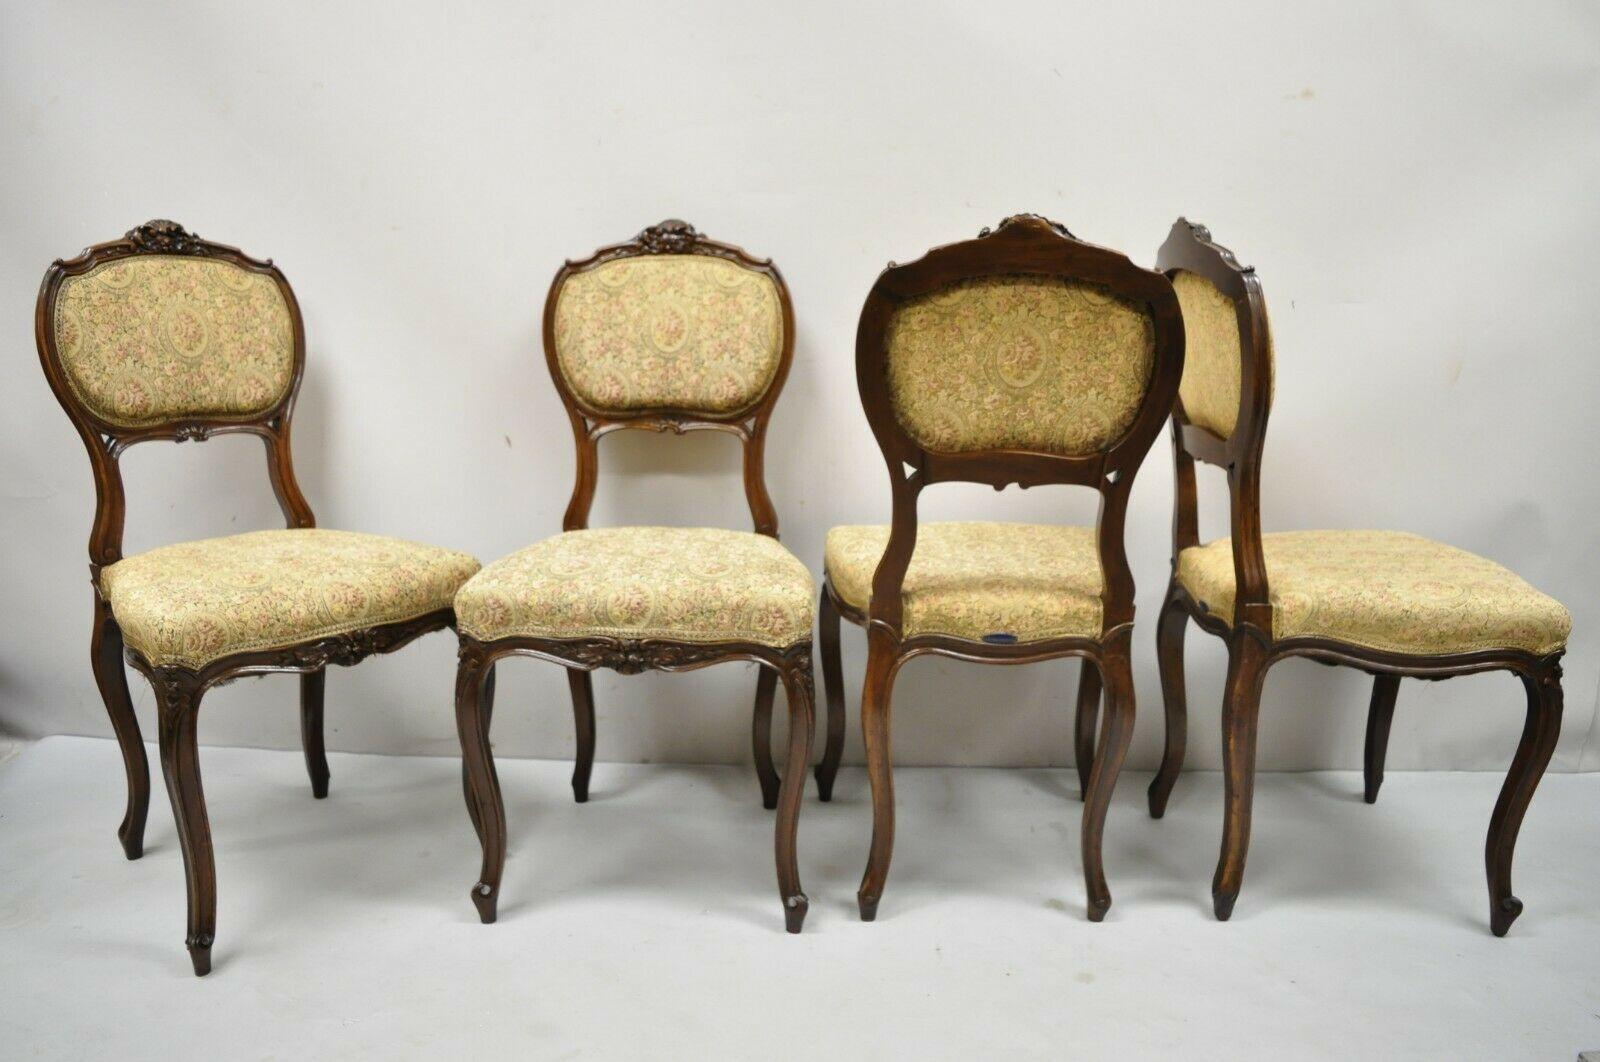 Antique French Victorian Mahogany Upholstered Parlor Side Chairs, Set of 4 For Sale 4